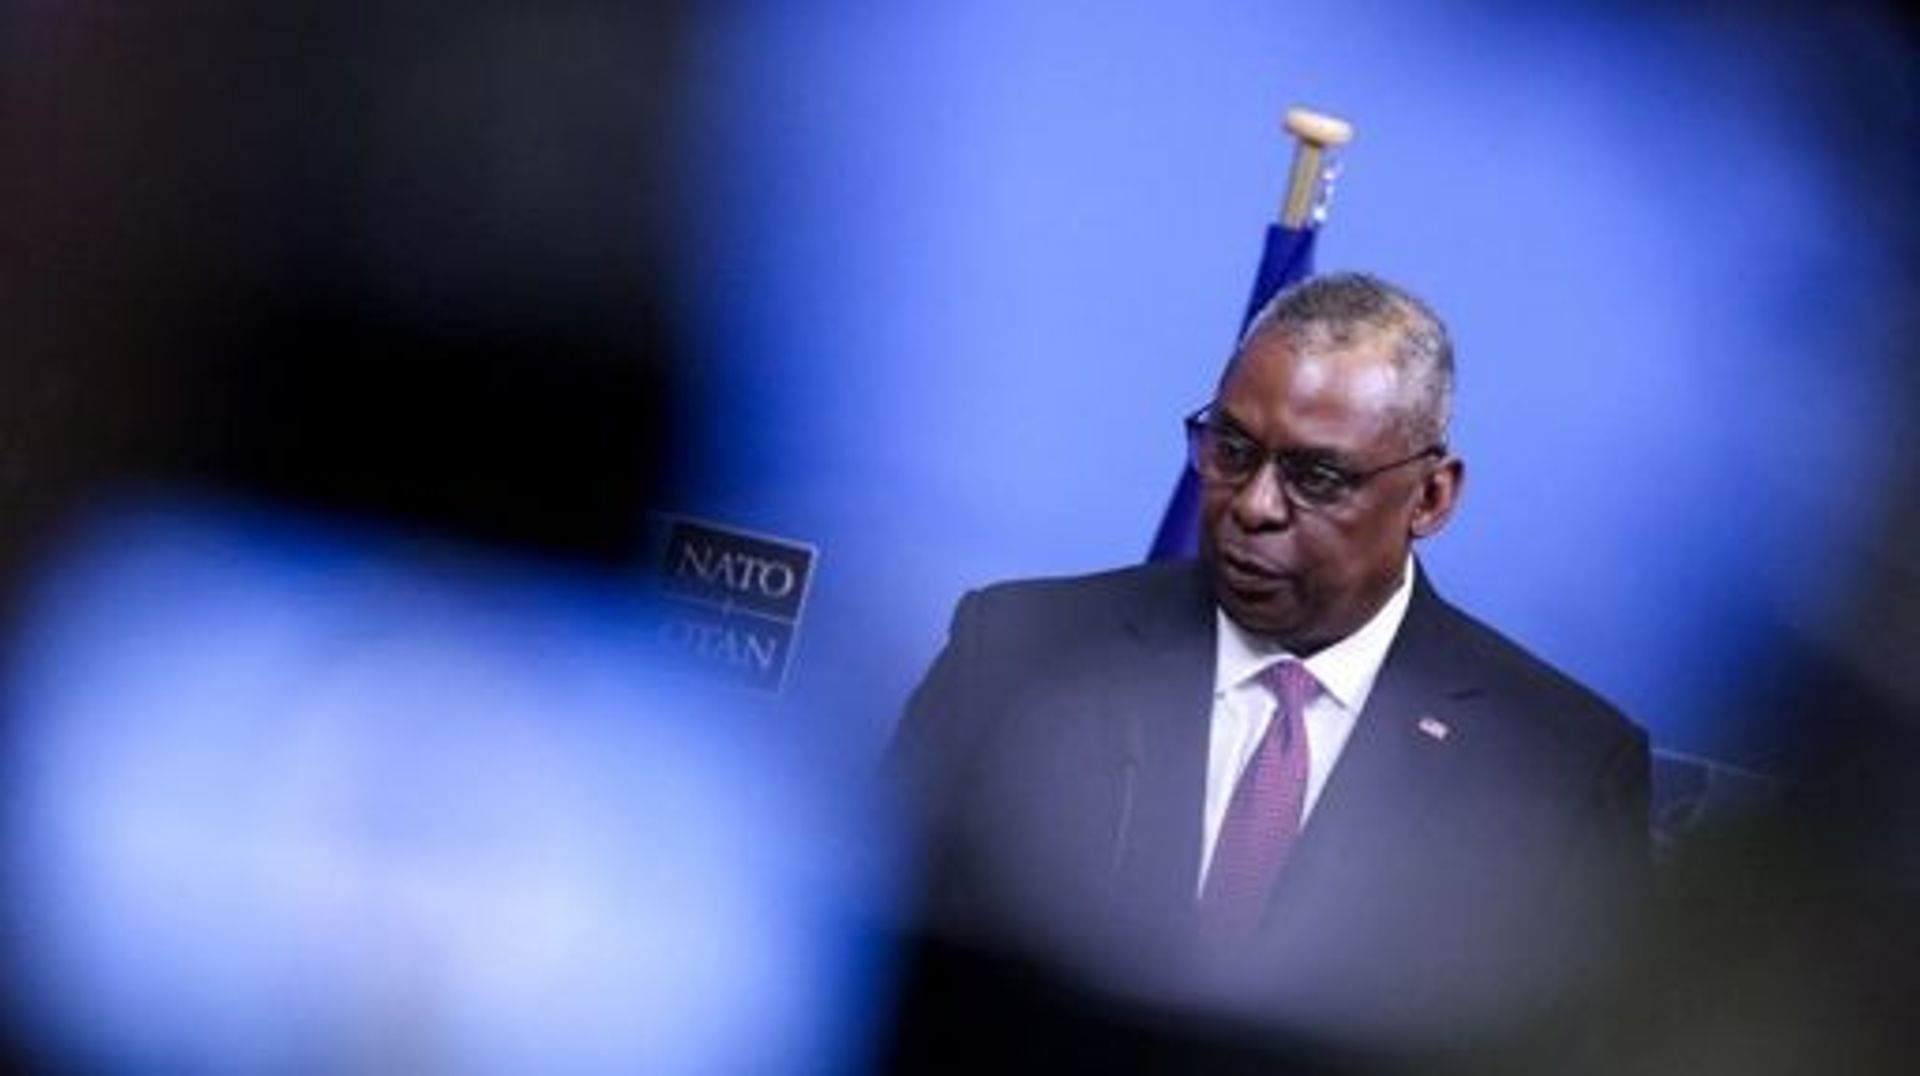 US Defense Secretary Lloyd Austin holds a press conference at the end of a two-day meeting of NATO Defence ministers at the NATO headquarters in Brussels on February 15, 2023.    Kenzo TRIBOUILLARD / AFP